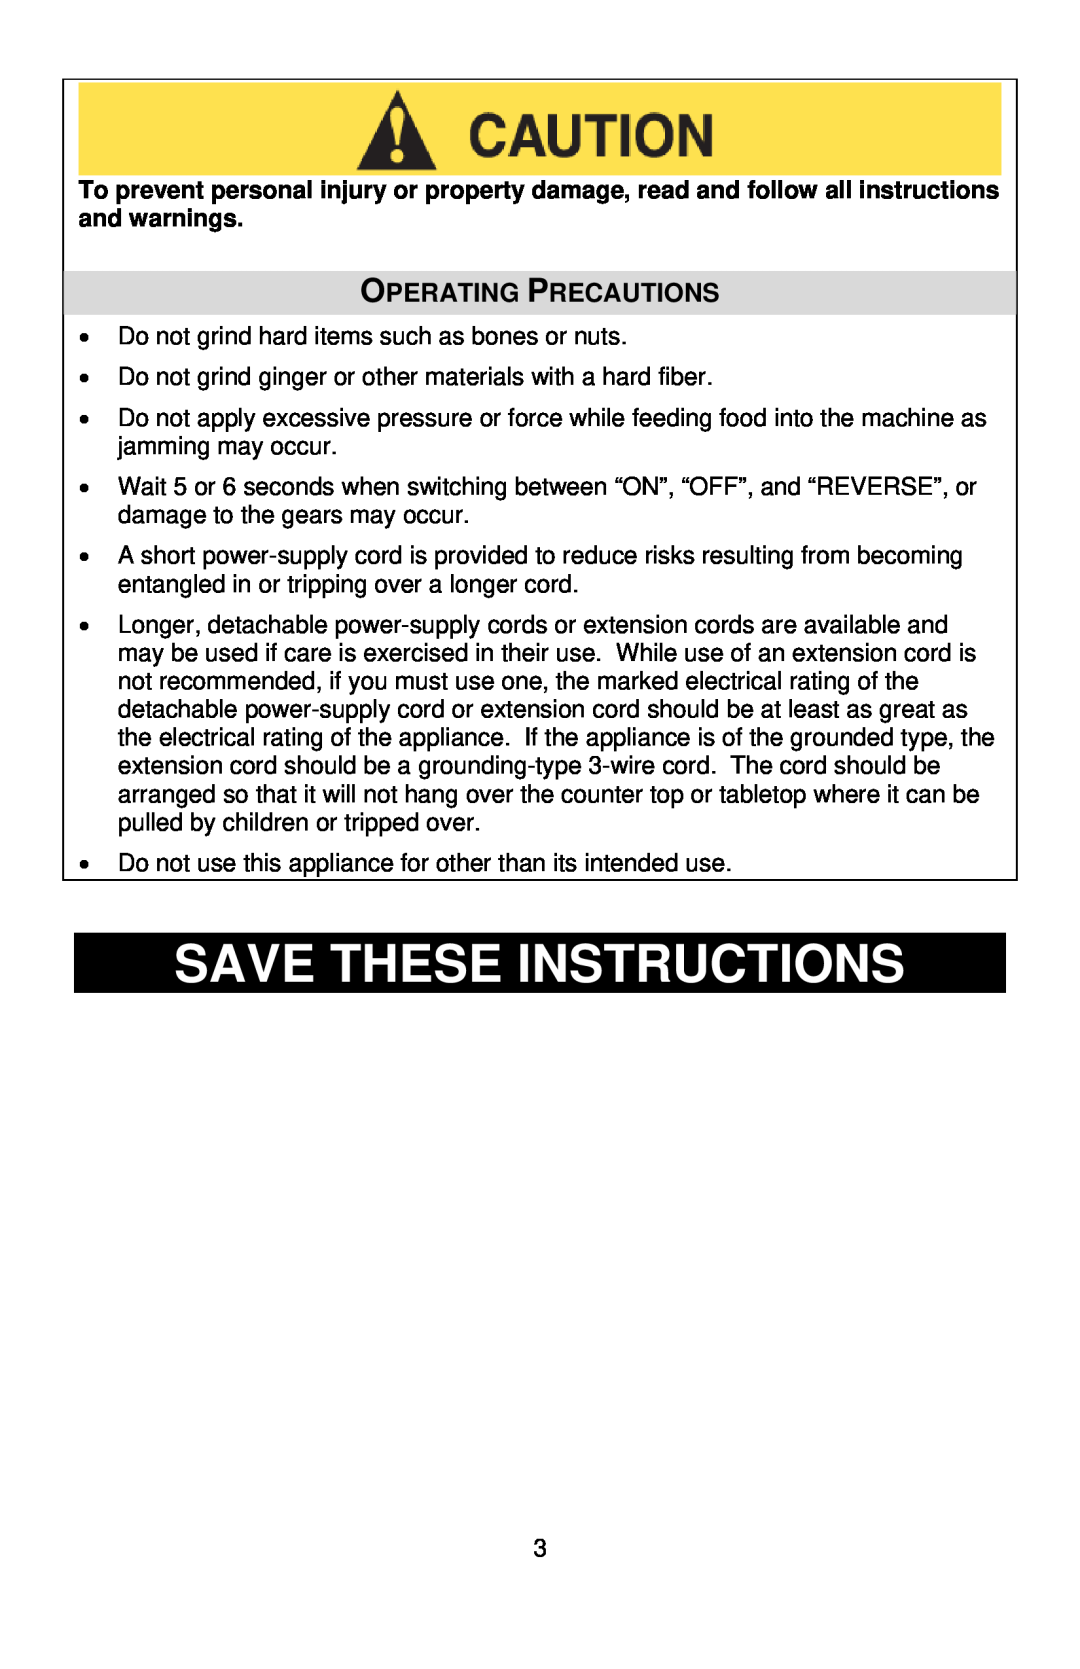 West Bend Back to Basics 4500 instruction manual Save These Instructions, Operating Precautions 